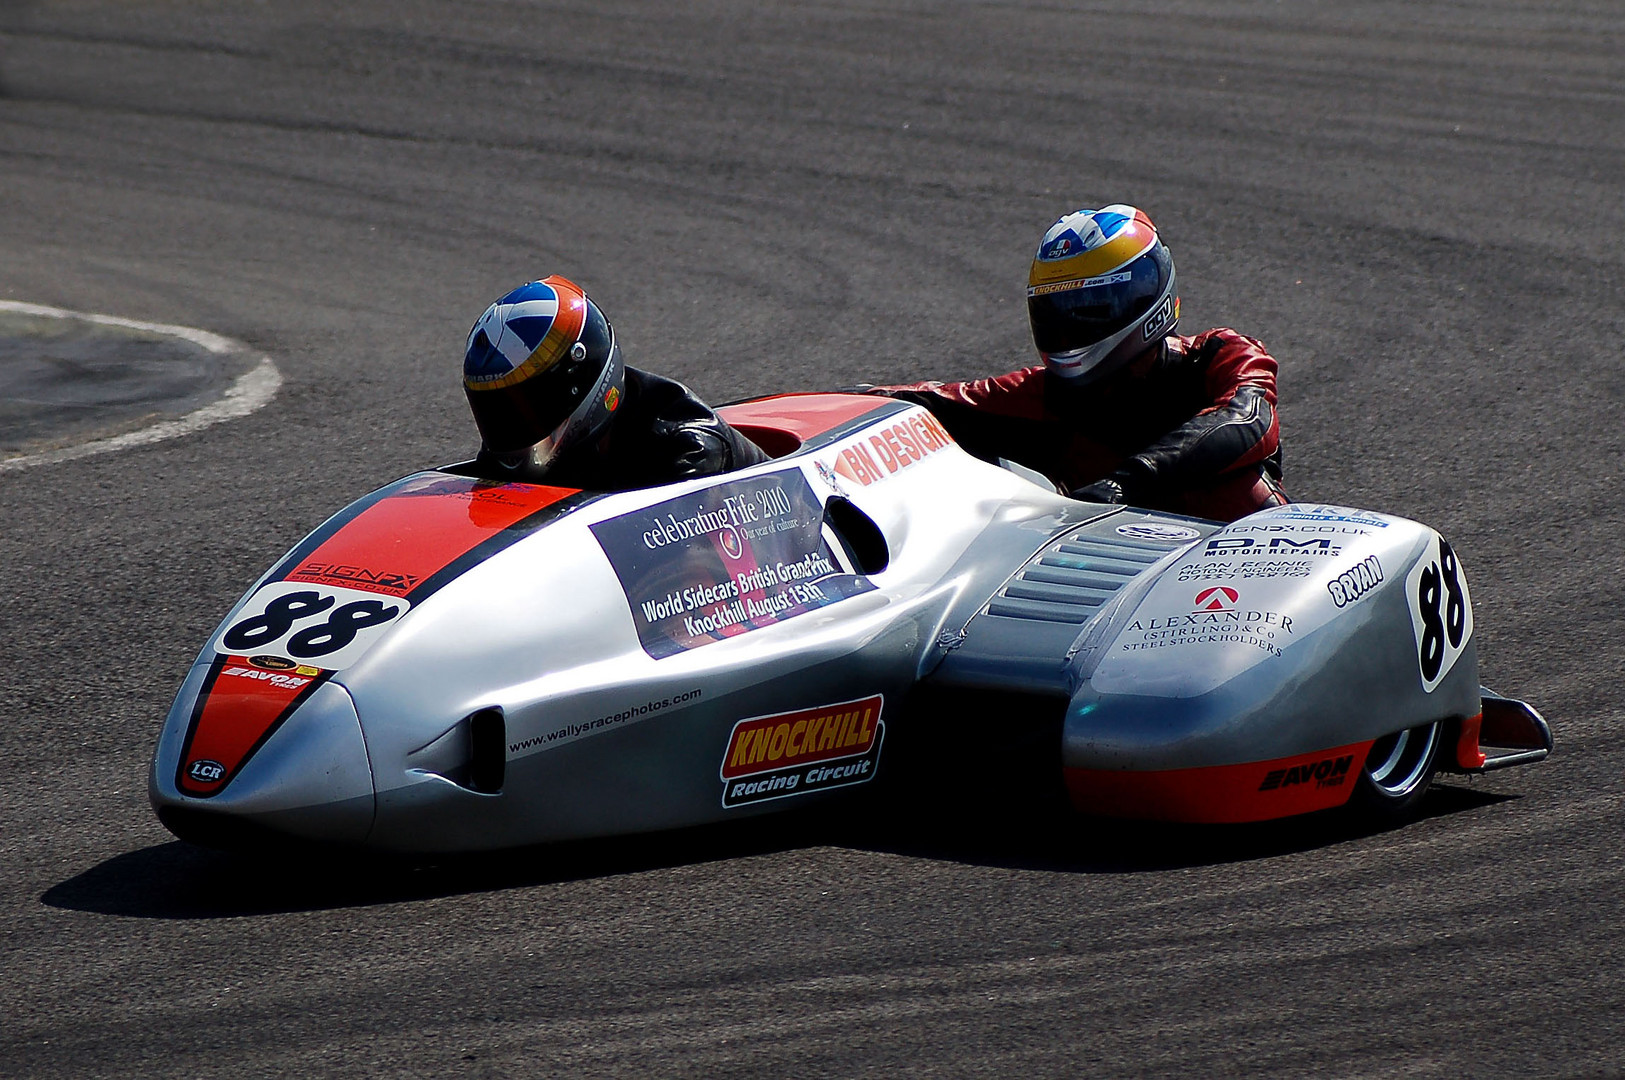 sidecar-racing-photo-image-sports-motorsport-subjects-images-at